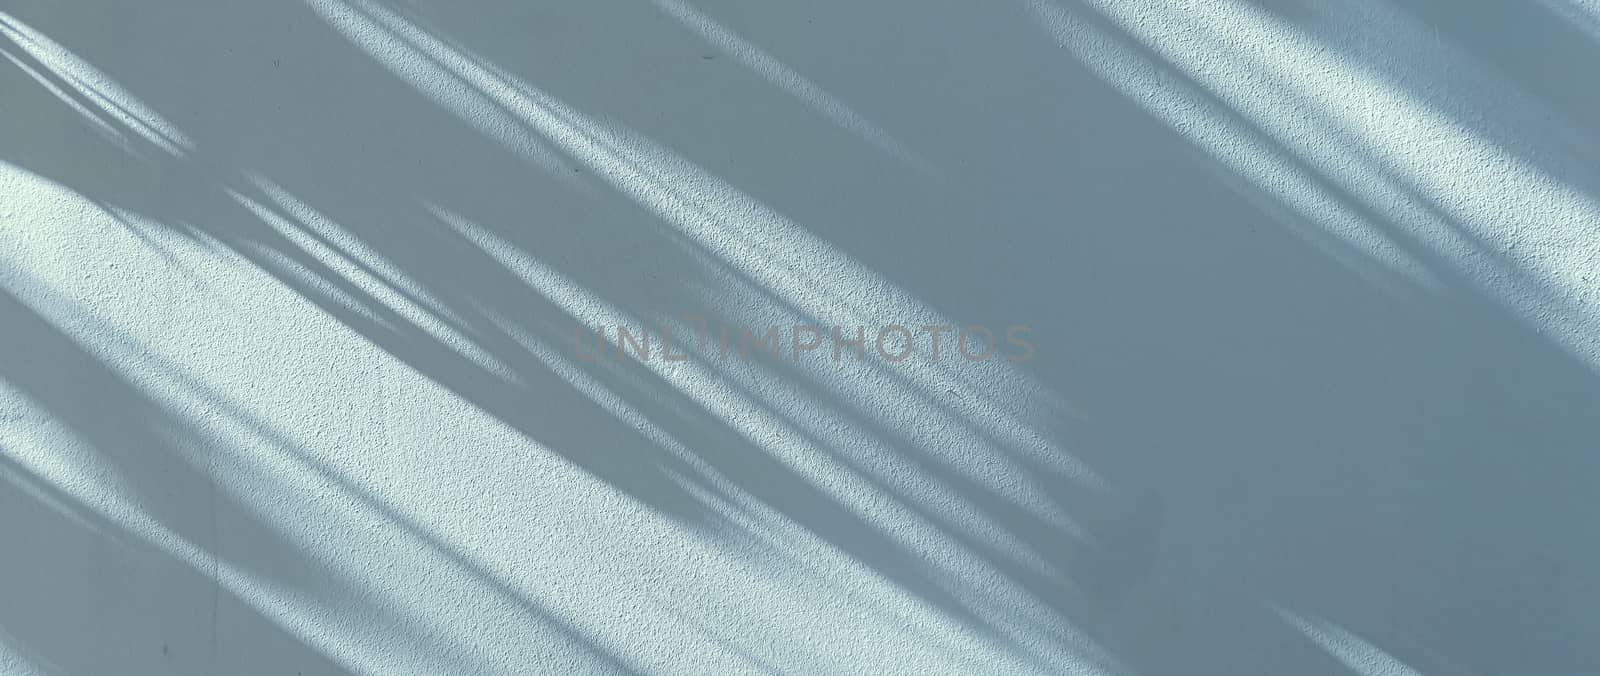 Shadows on the wall, sunshine and sun rays on summer day at sunset, nature and abstract concept